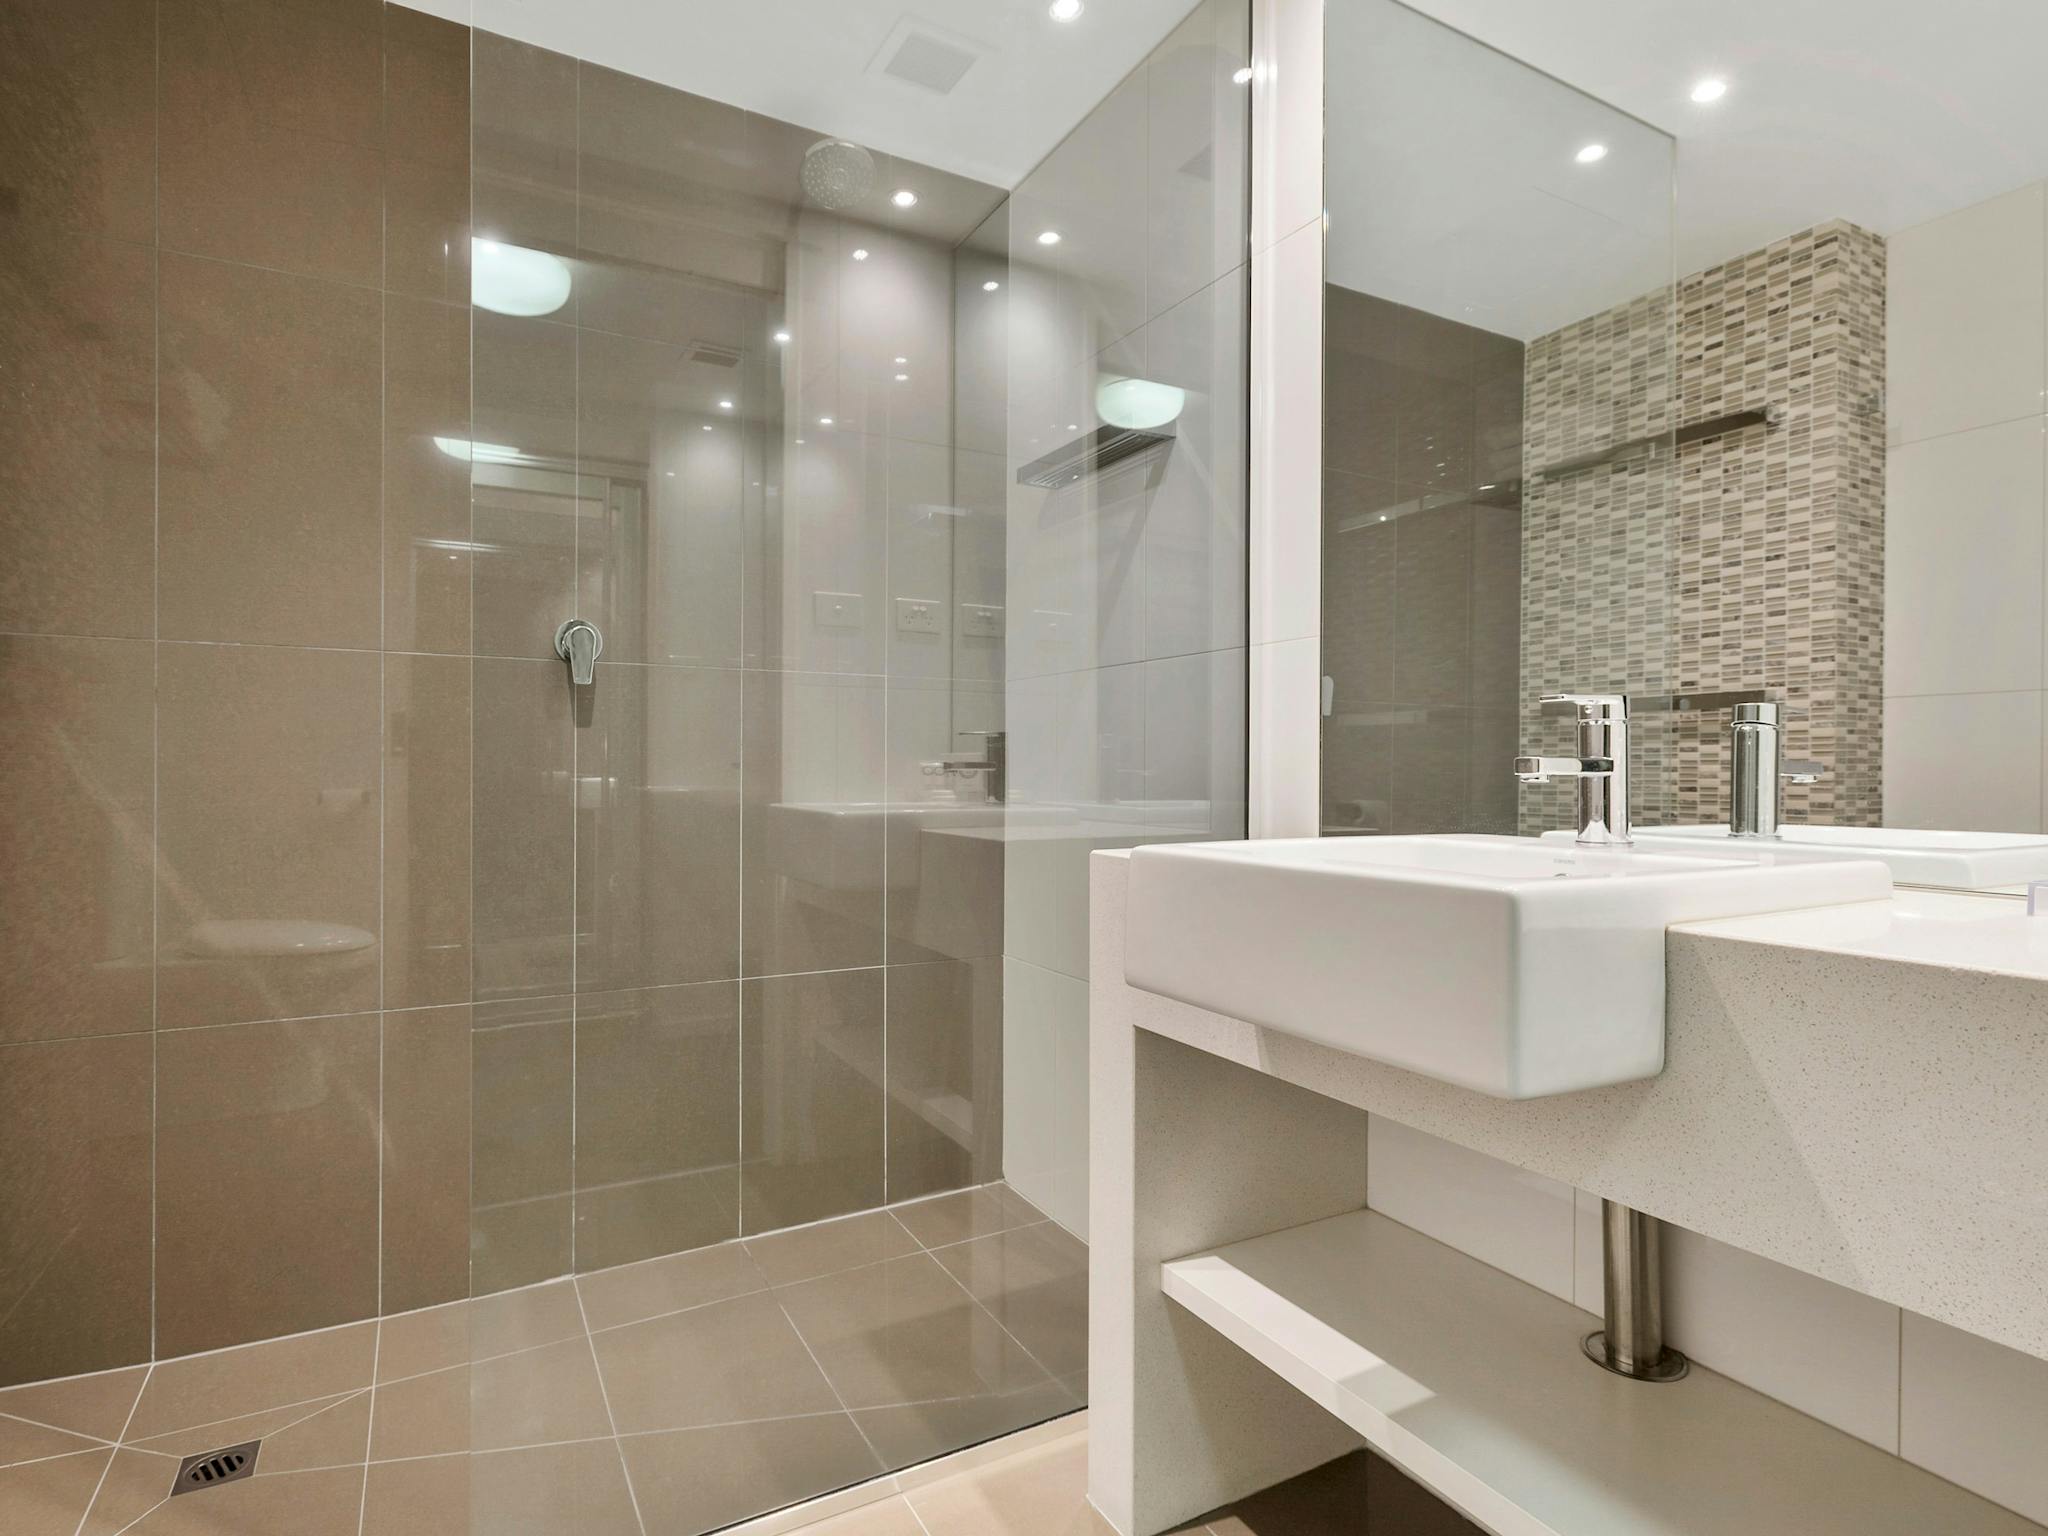 The Gateway's Family Suite Bathroom includes  large walk-in shower, toilet and vanity